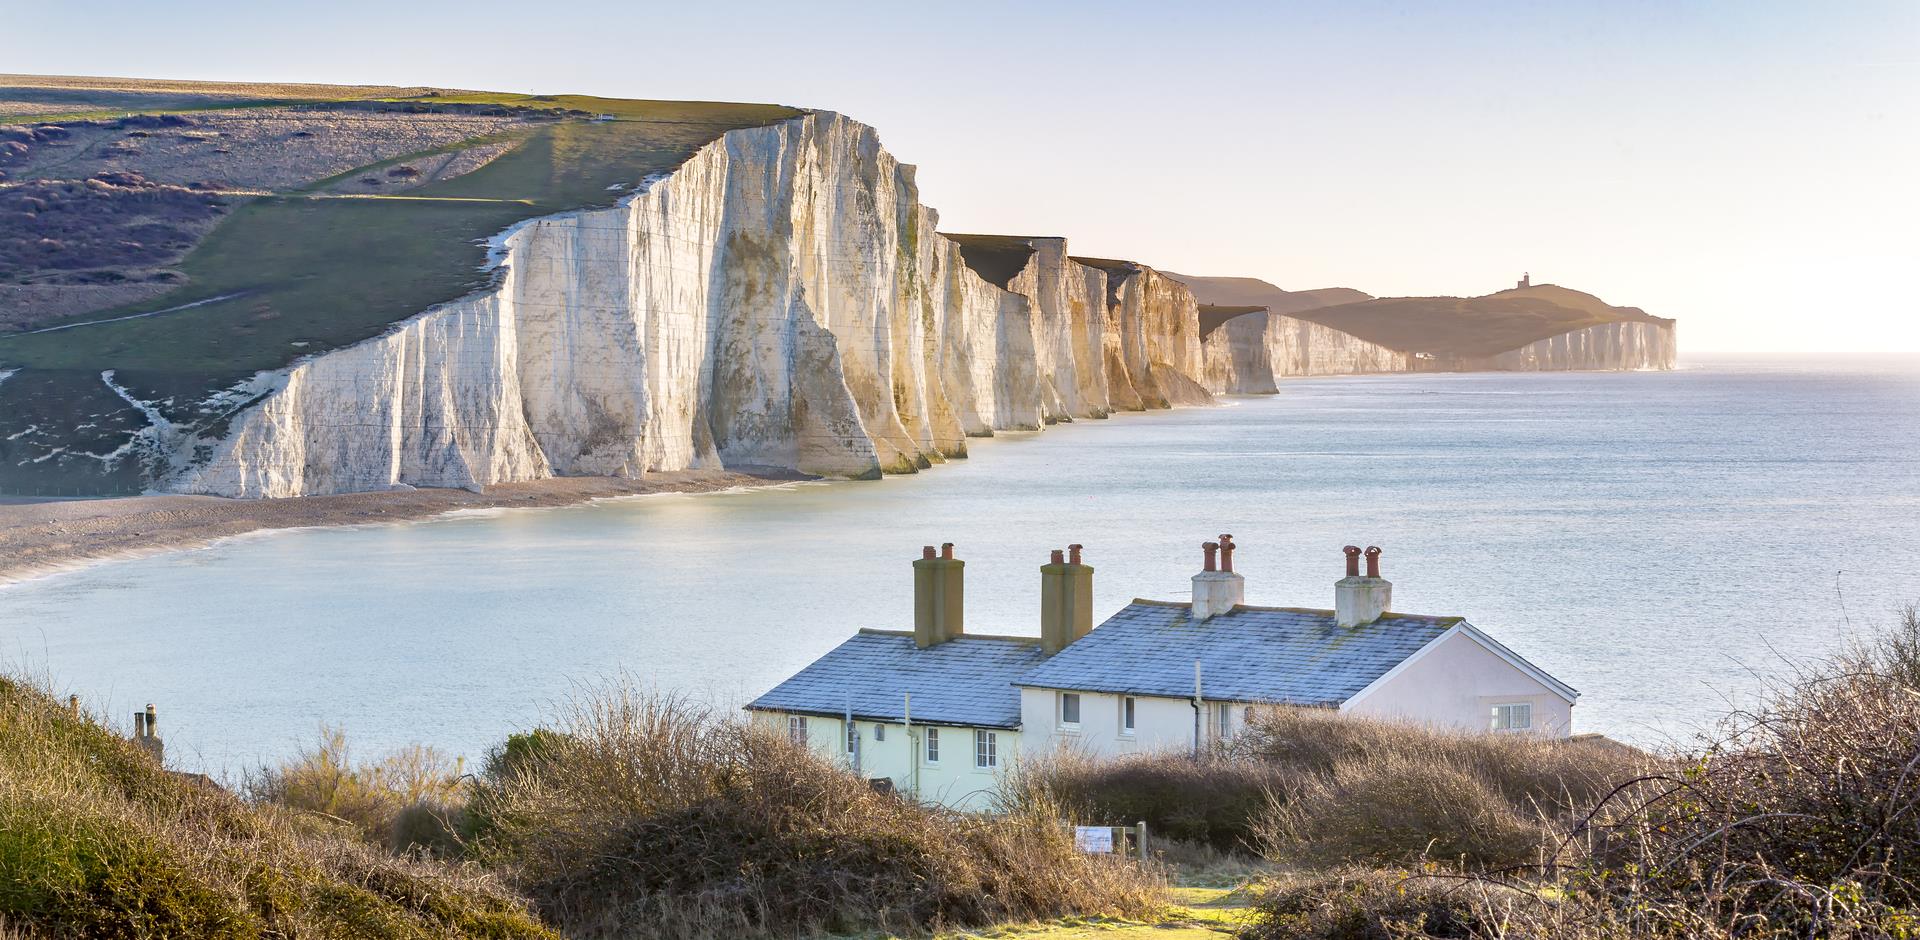 Seaview of the Severn Sisters chalk cliffs in south downs during the daytime